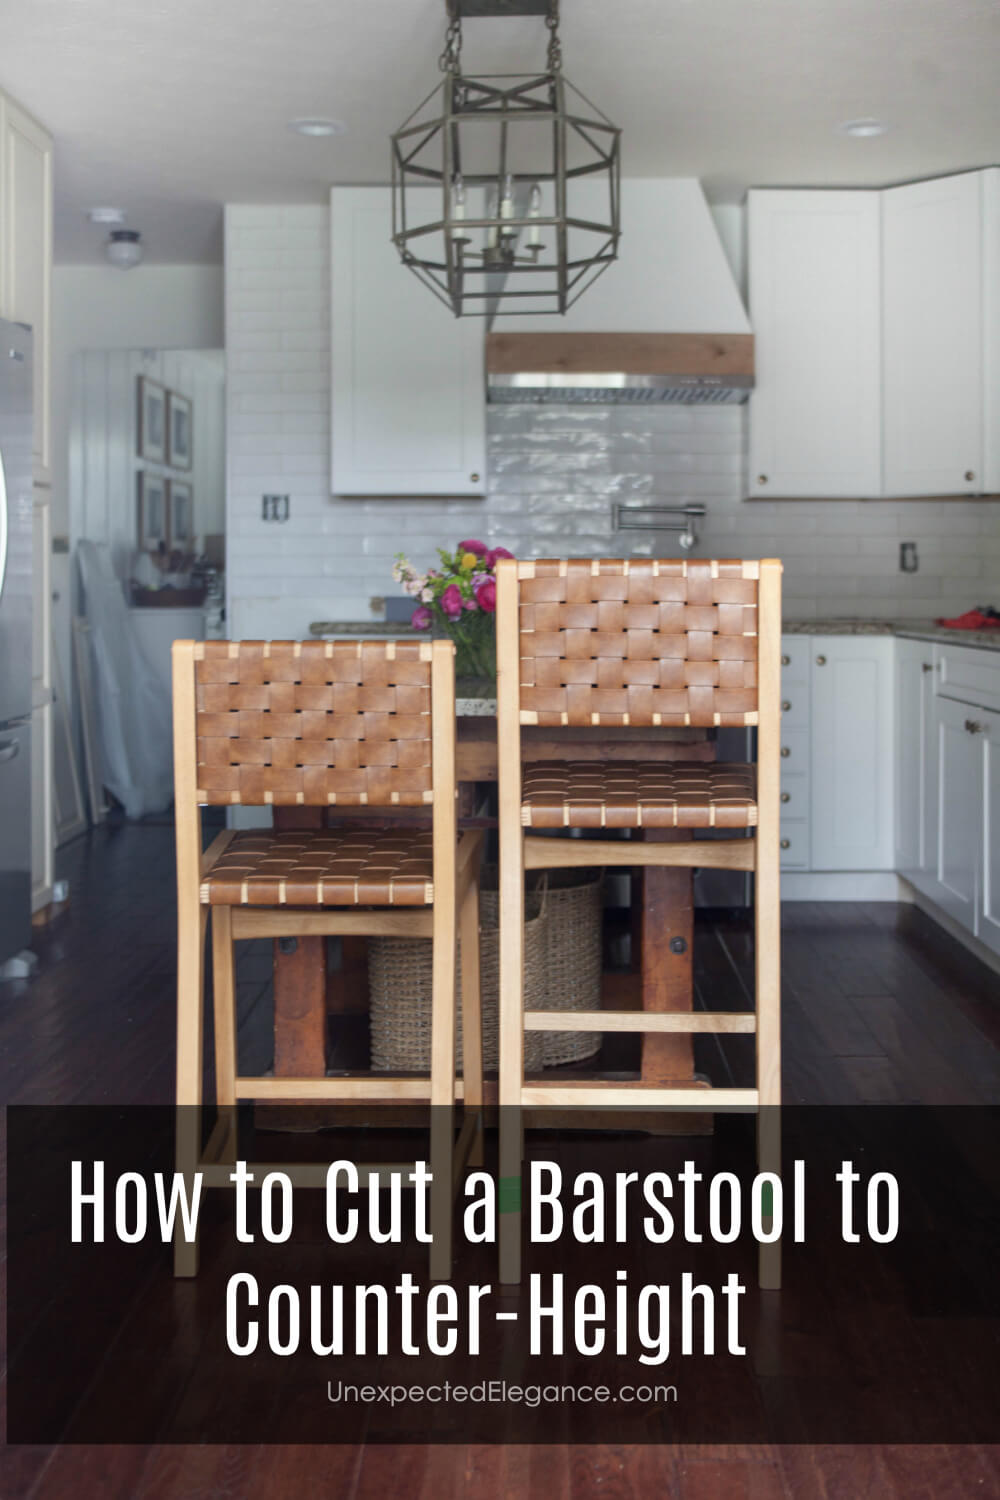 How To Cut A Barstool Counter Height, Best Way To Cut Bar Stool Legs